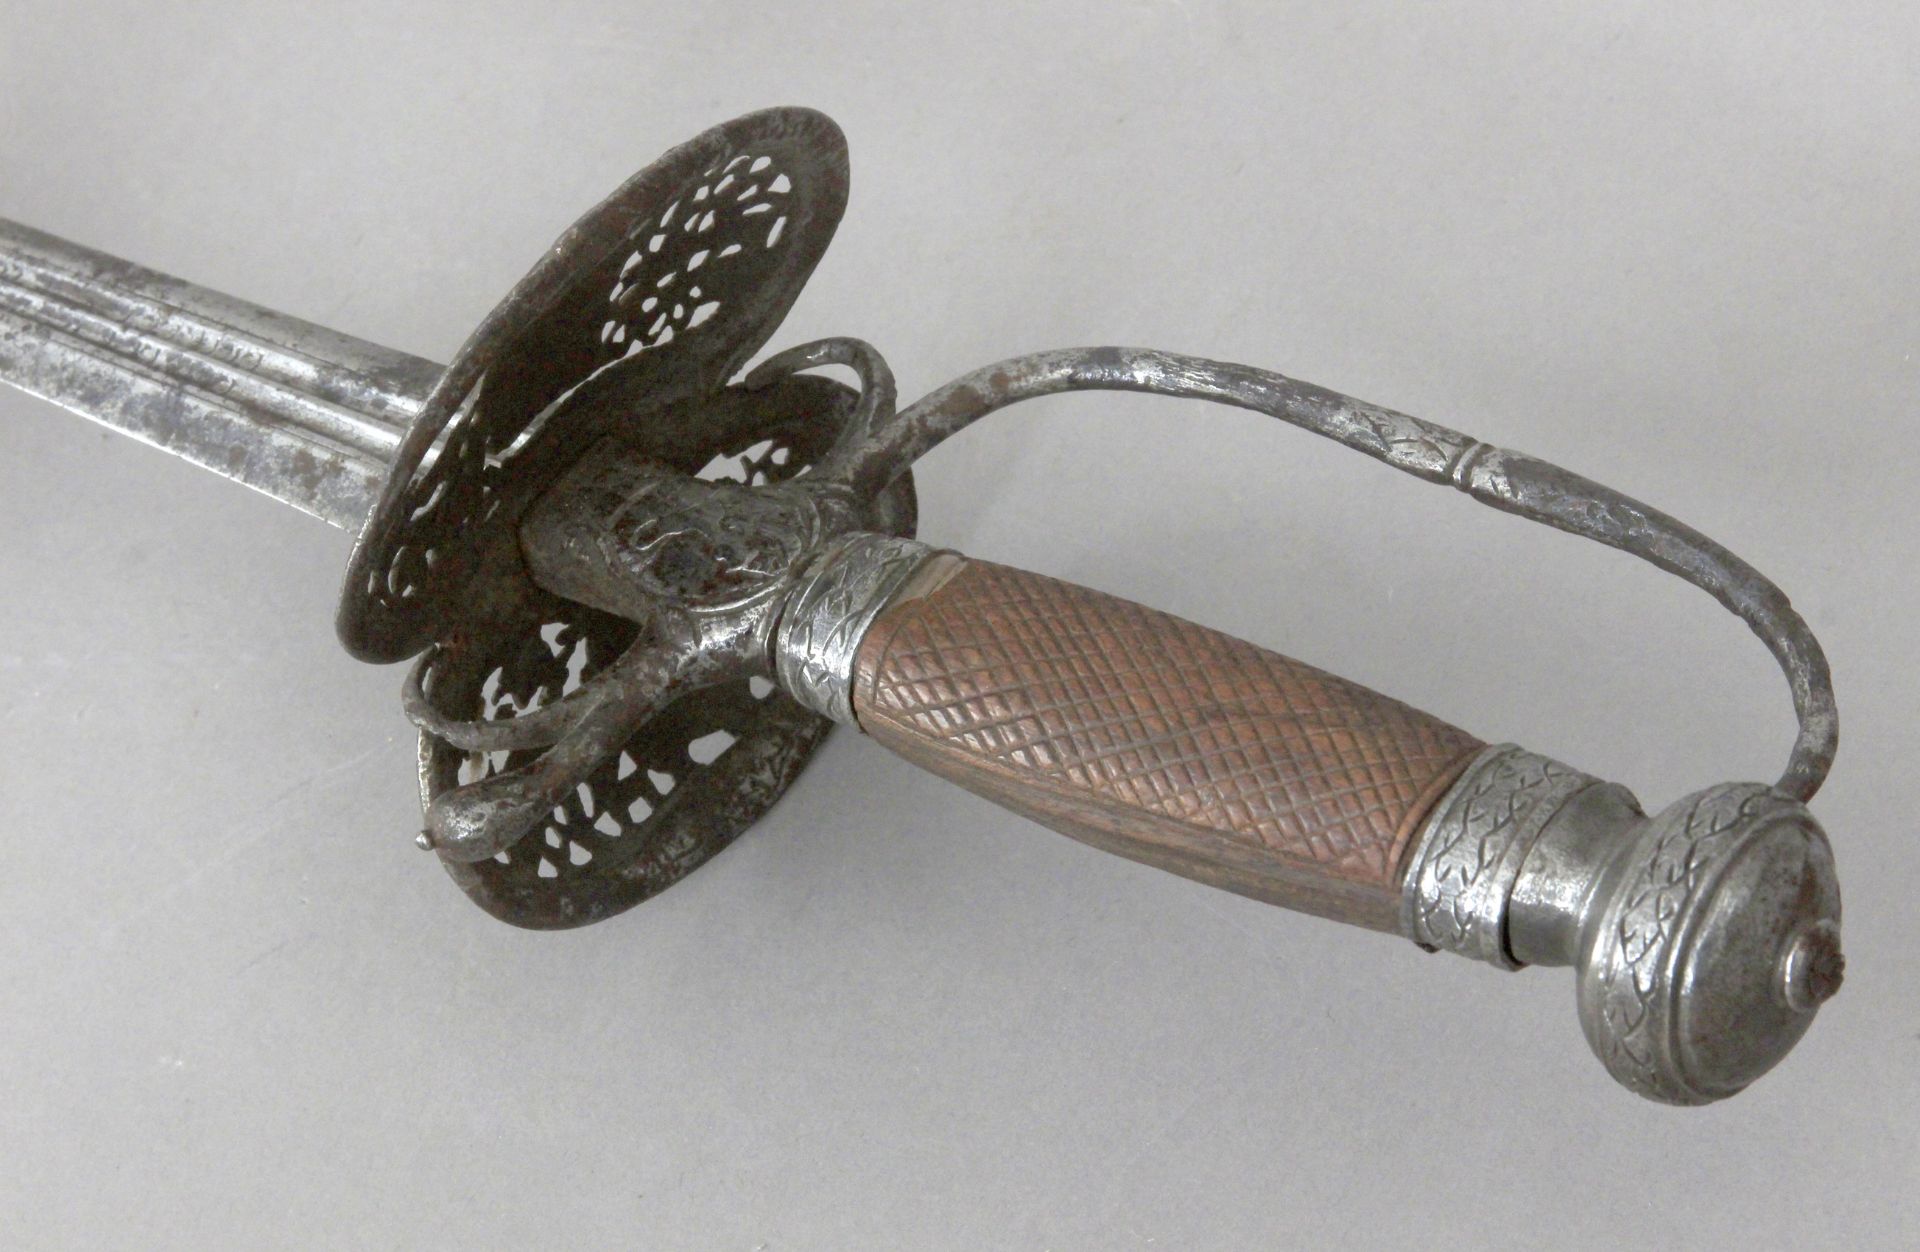 An 18th century ceremonial sword with a blade possibly from Toledo - Image 4 of 5